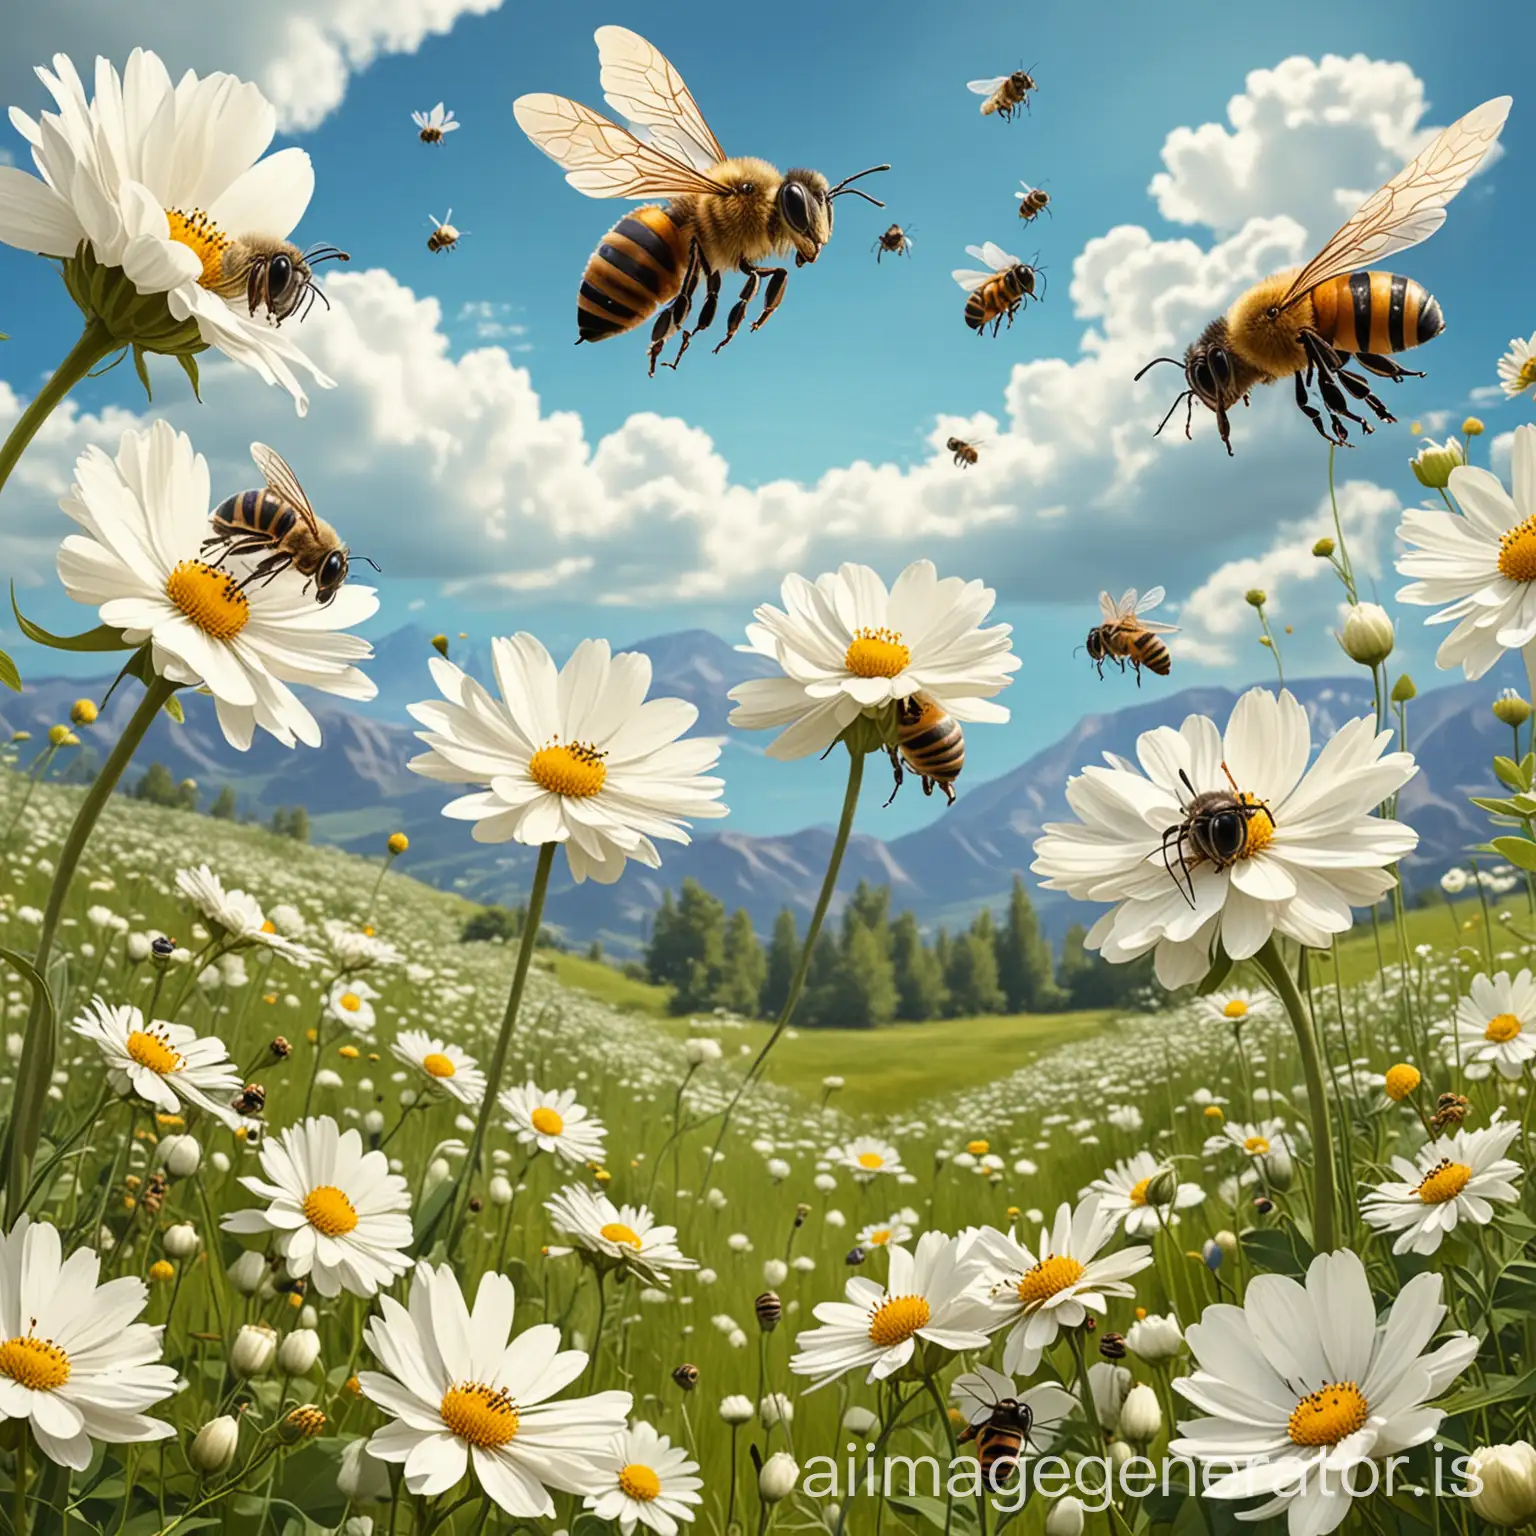 Group of bees in cartoon style flying and foraging above a meadow full of huge white flowers